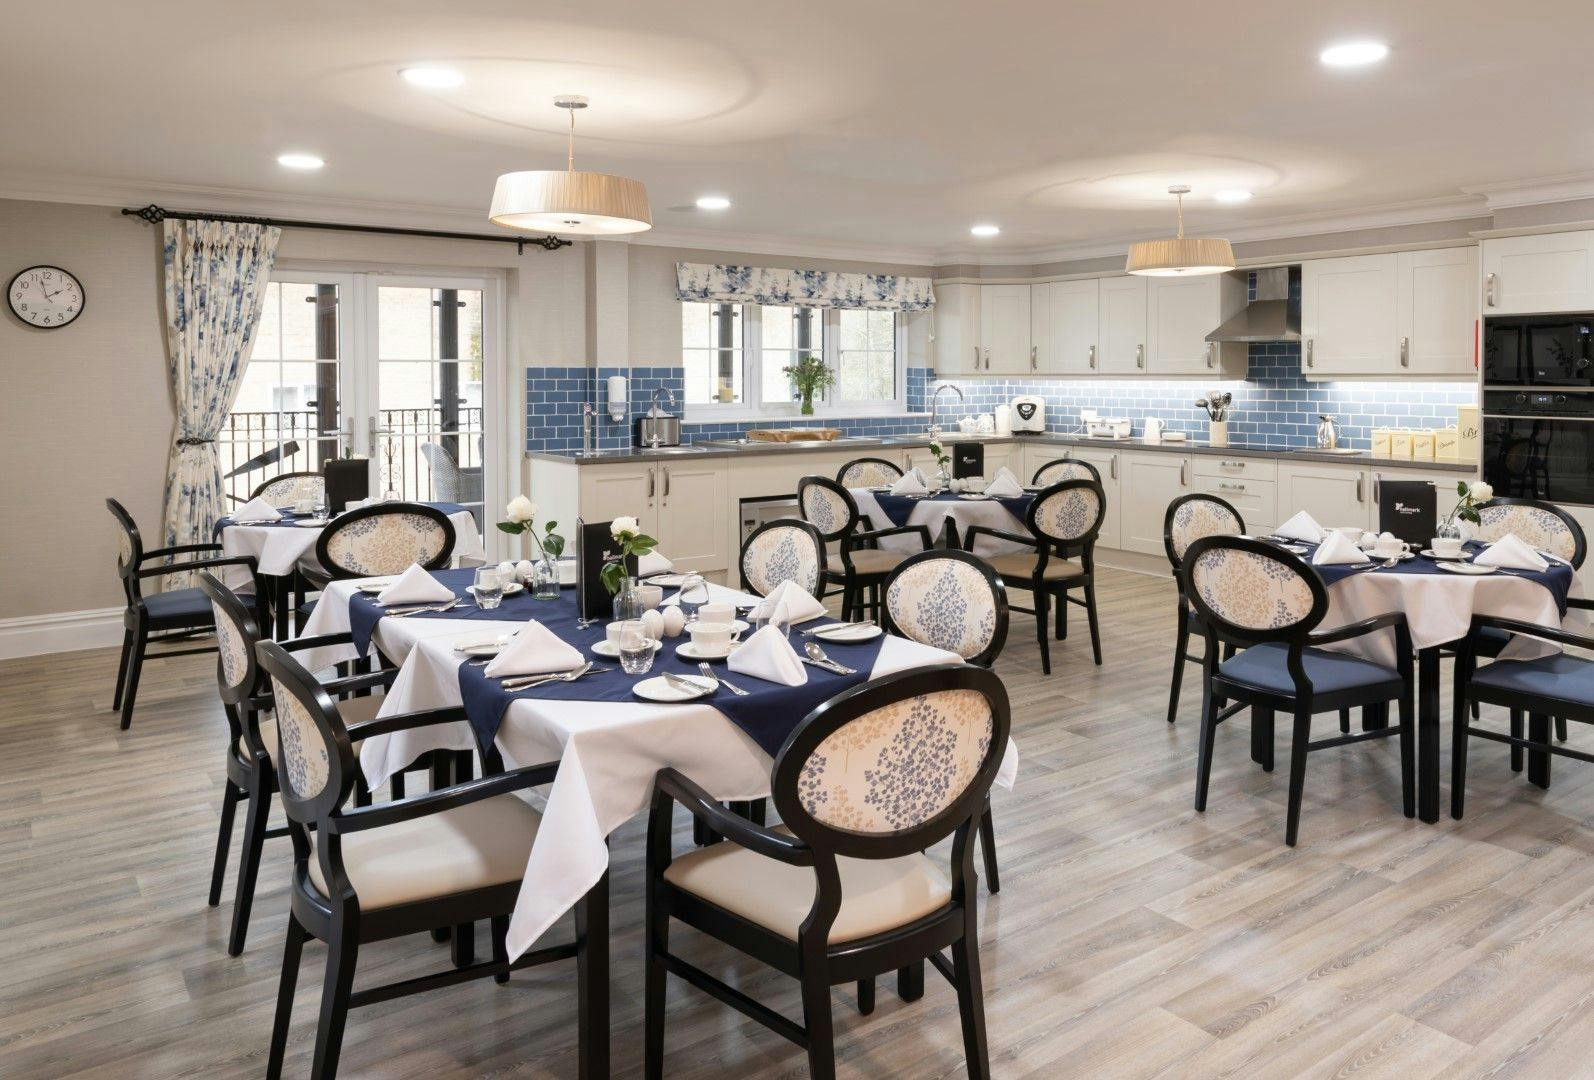 Dining Area at Henley Manor Care Home in Henley-on-Thames, South Oxfordshire